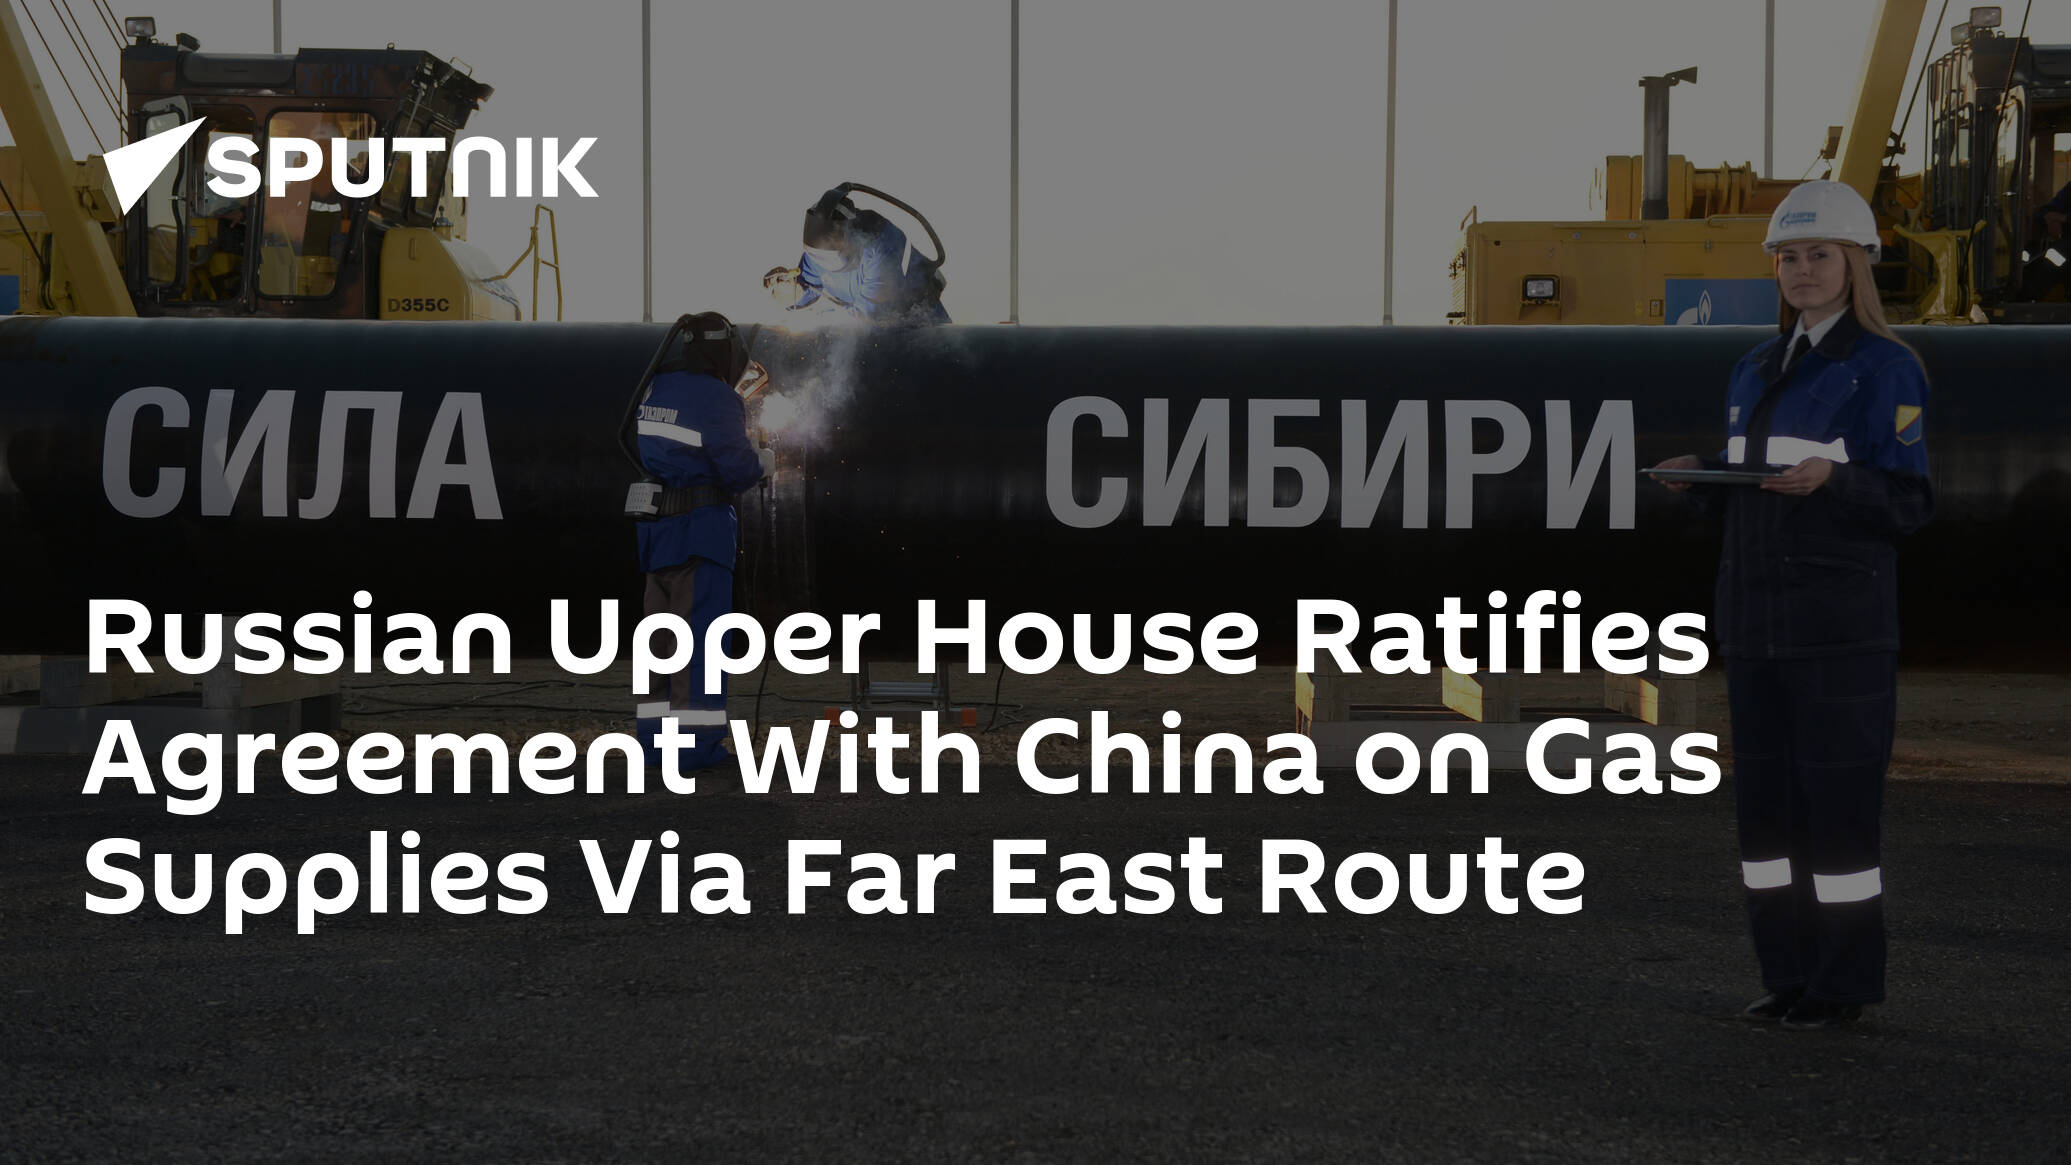 Russian Upper House Ratifies Agreement With China on Gas Supplies Via Far East Route